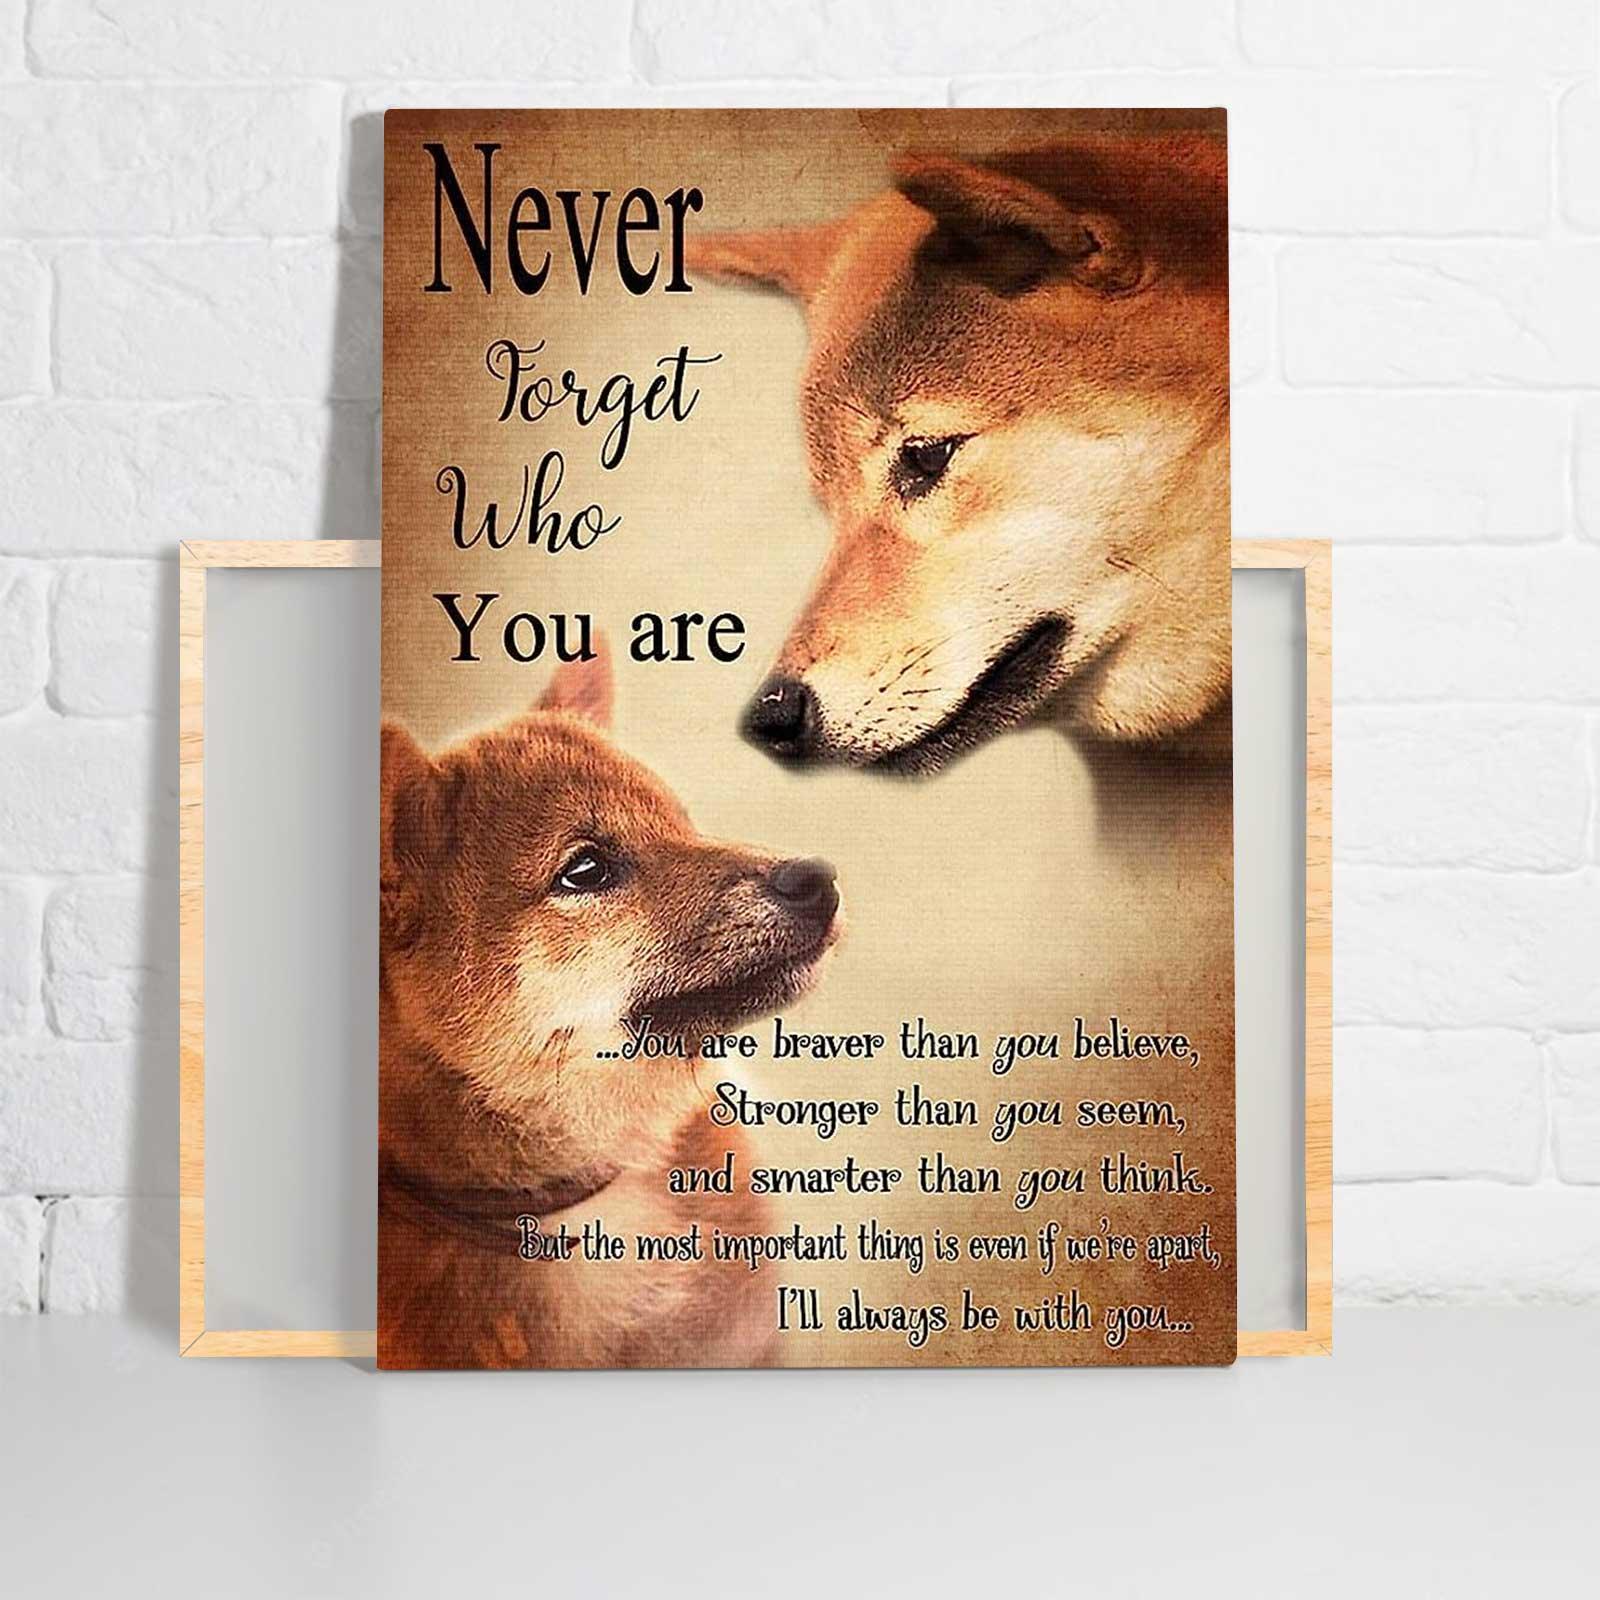 Shiba Inu Portrait Canvas - Never Forget Who You Are - Gift For Dog Lovers, Daughter, Son Portrait Canvas, Wall Decor Visual Art - Amzanimalsgift